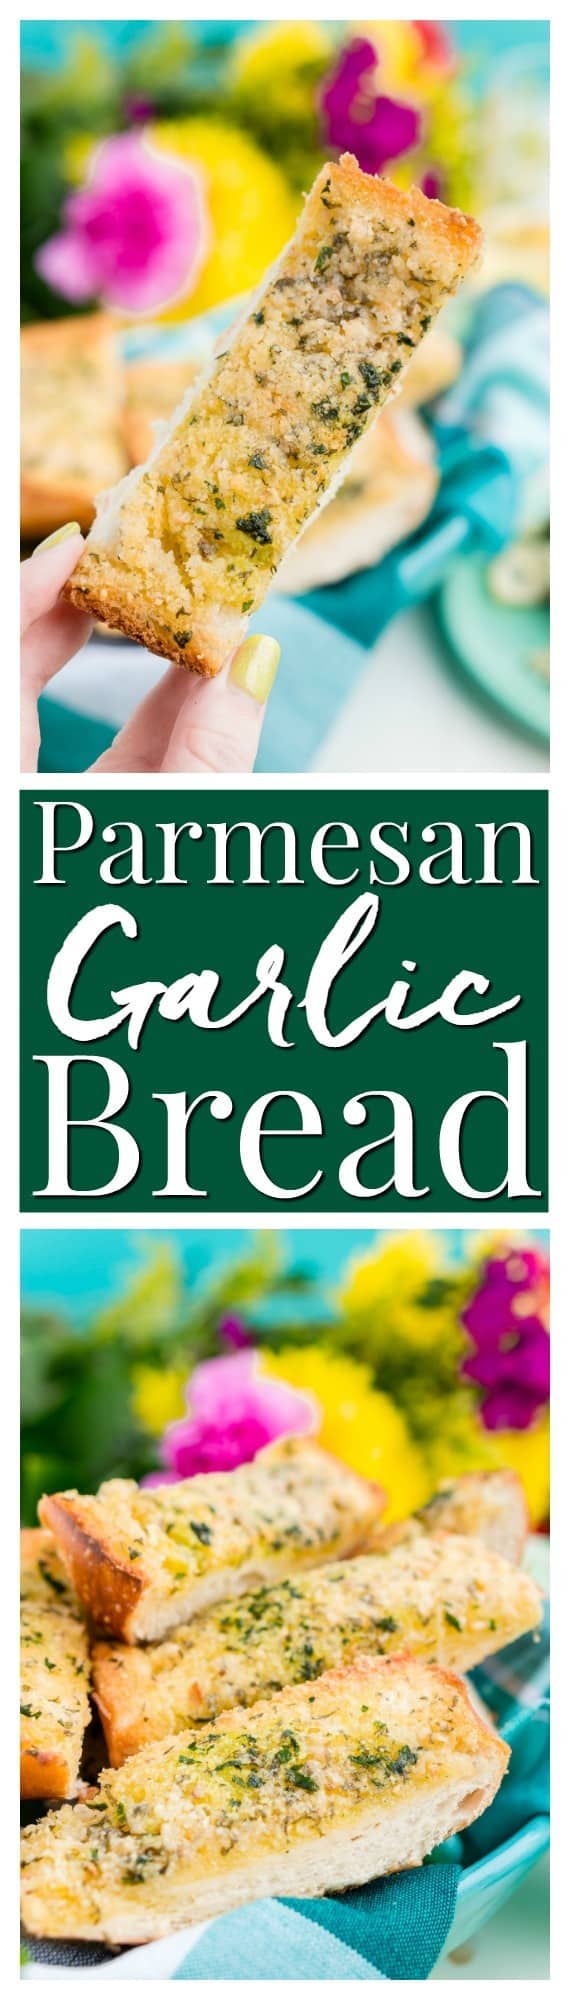 This Parmesan Garlic Bread is the perfect side for Bertolli's Frozen Chicken Florentine. A quick and easy recipe loaded with herbs, butter, and Parmesan cheese that can be whipped up in minutes! via @sugarandsoulco